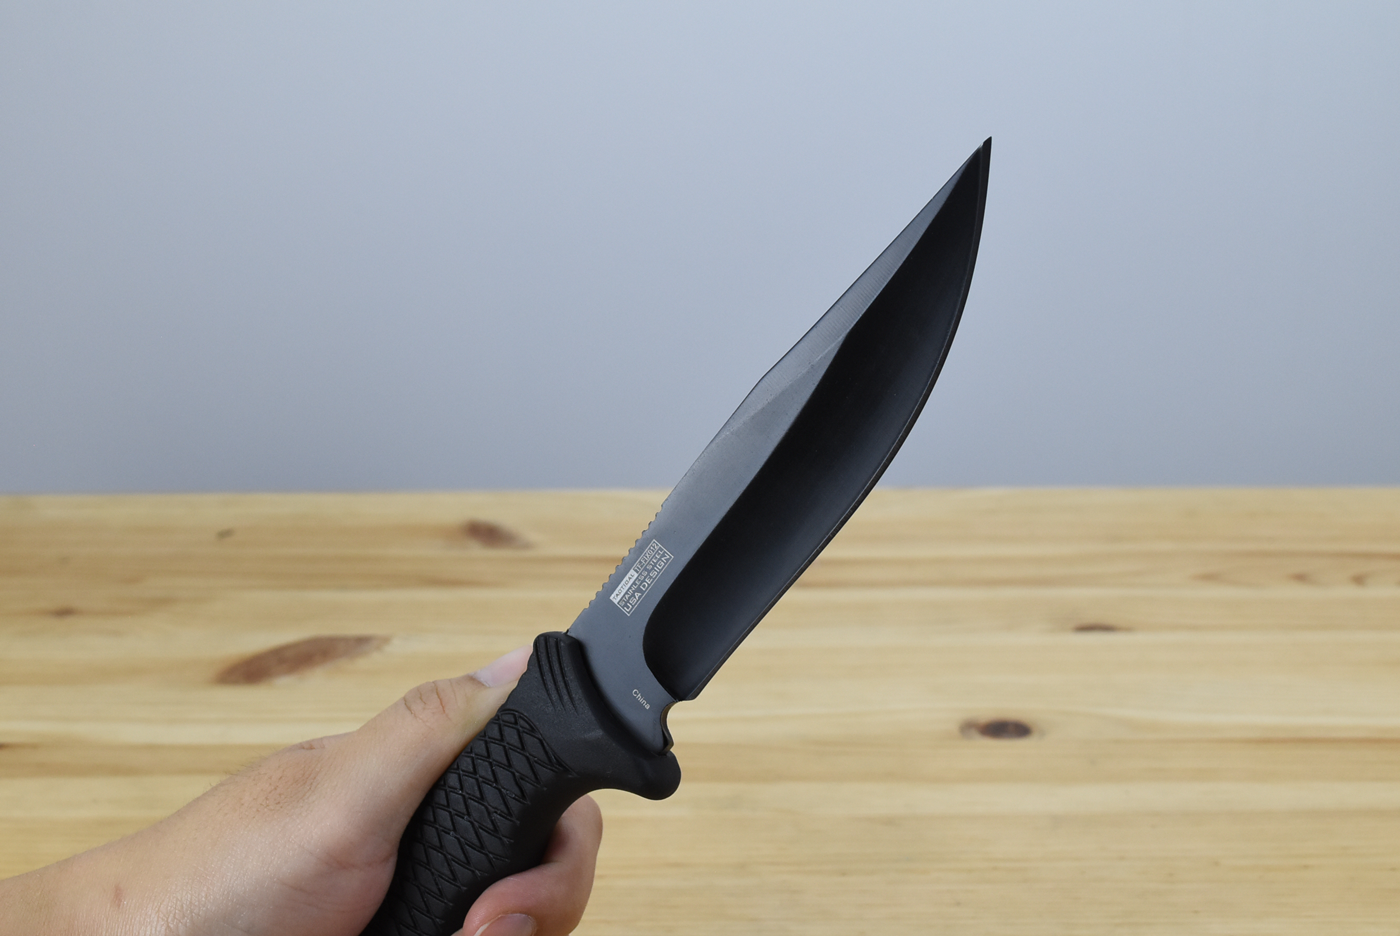 Tac Force 012 Fixed Blade (Black Handle)